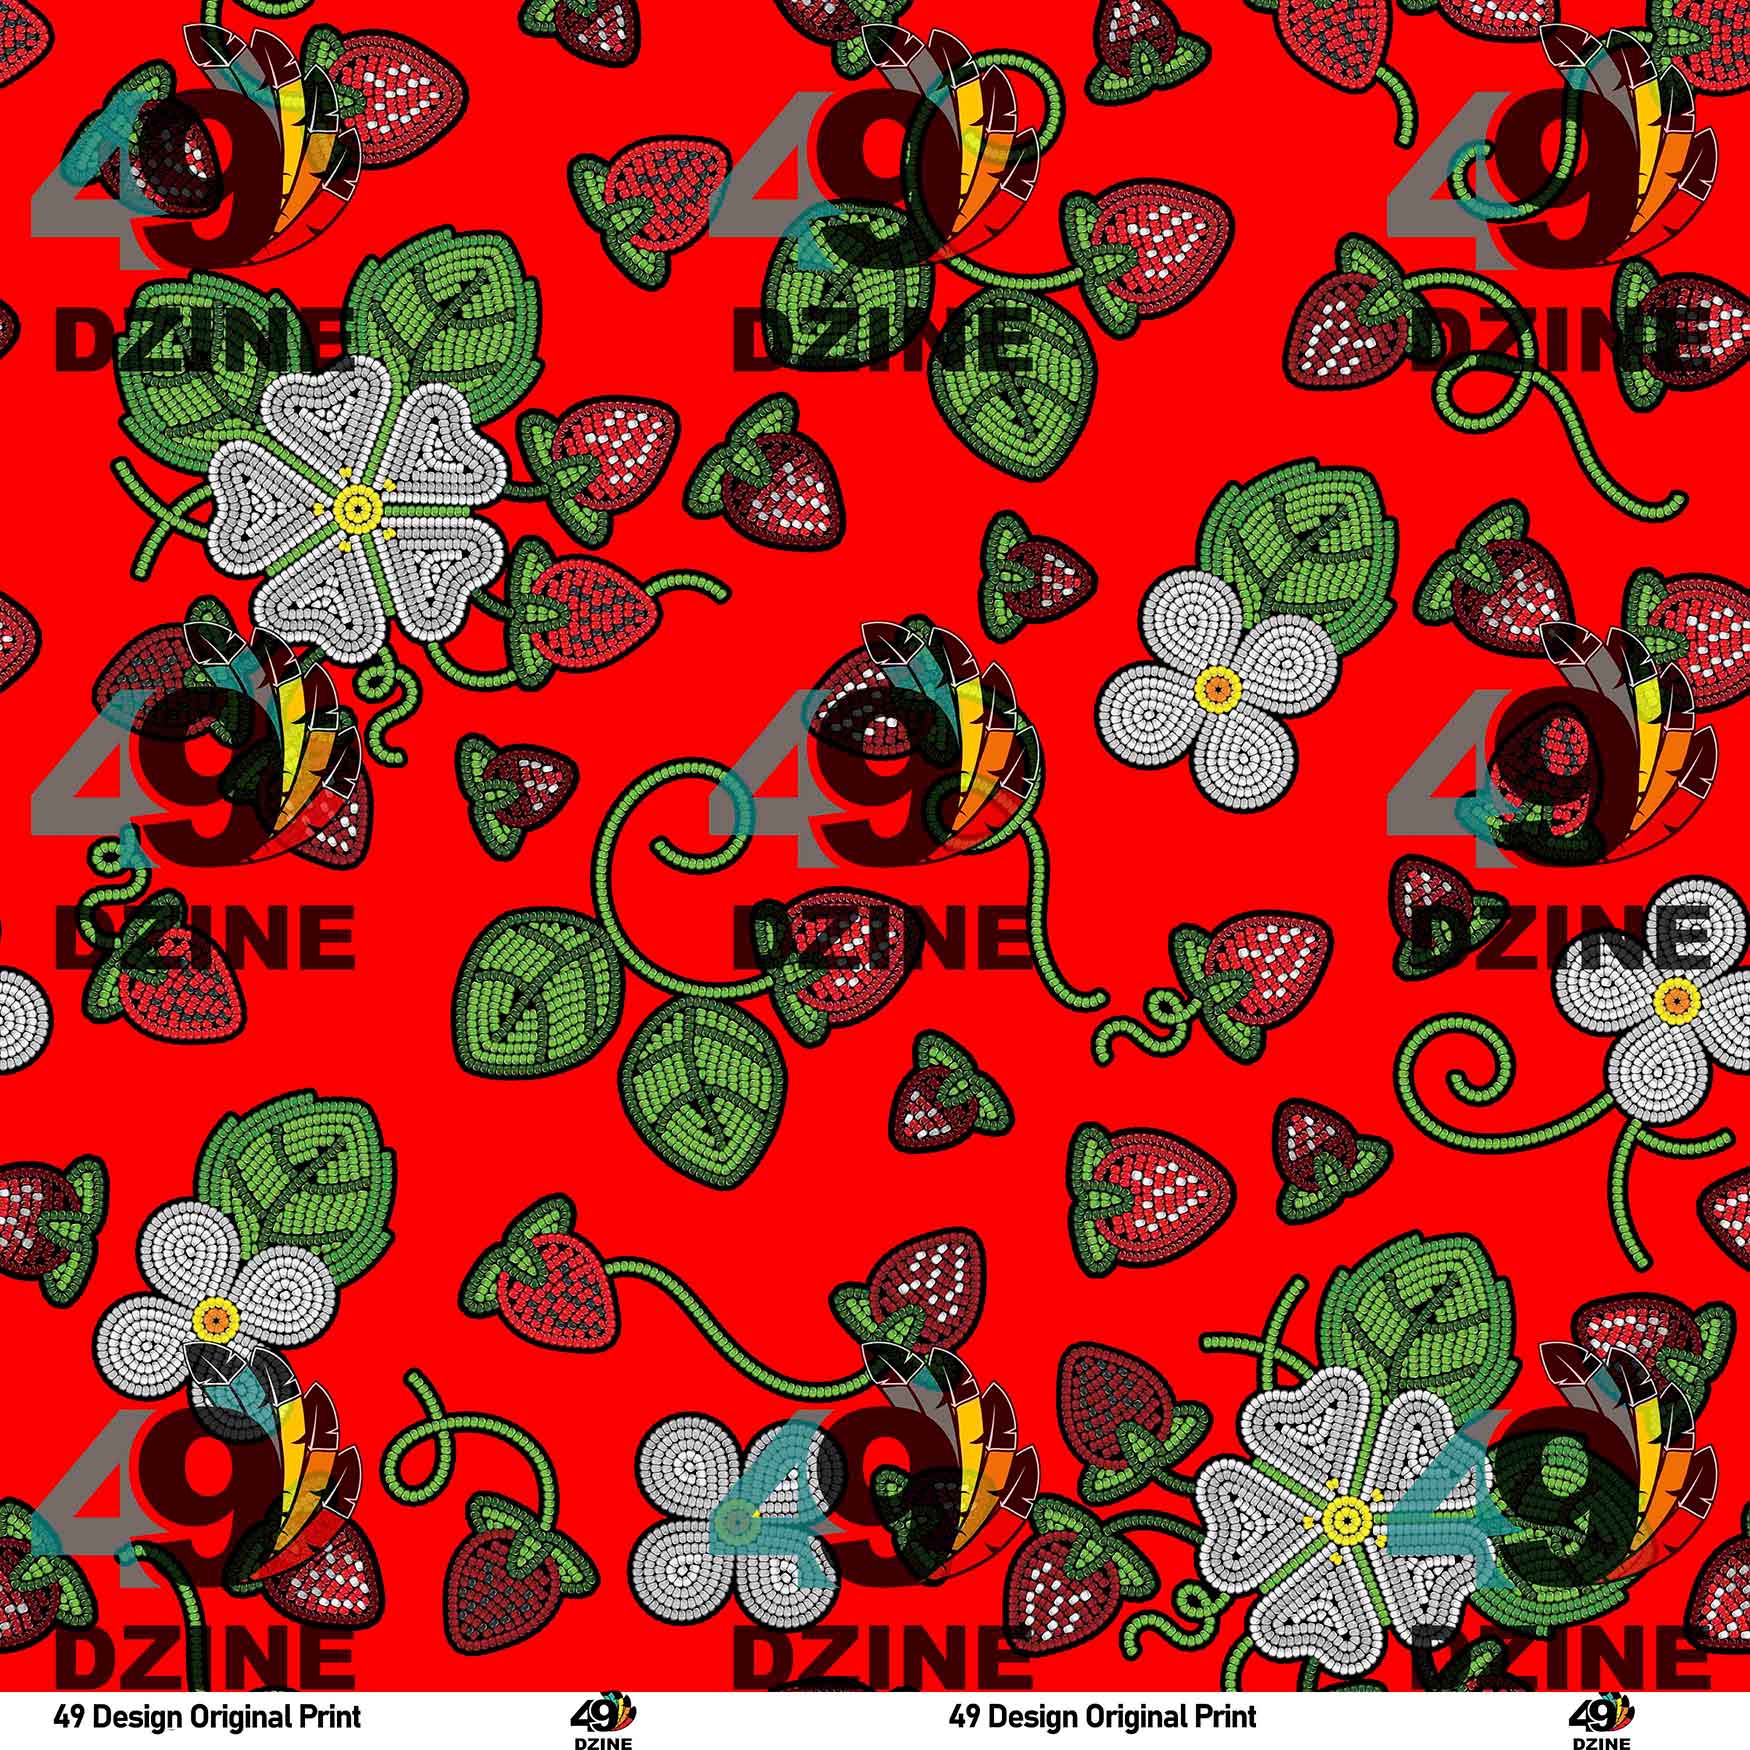 Strawberry Dreams Cotton Fabric by the Yard